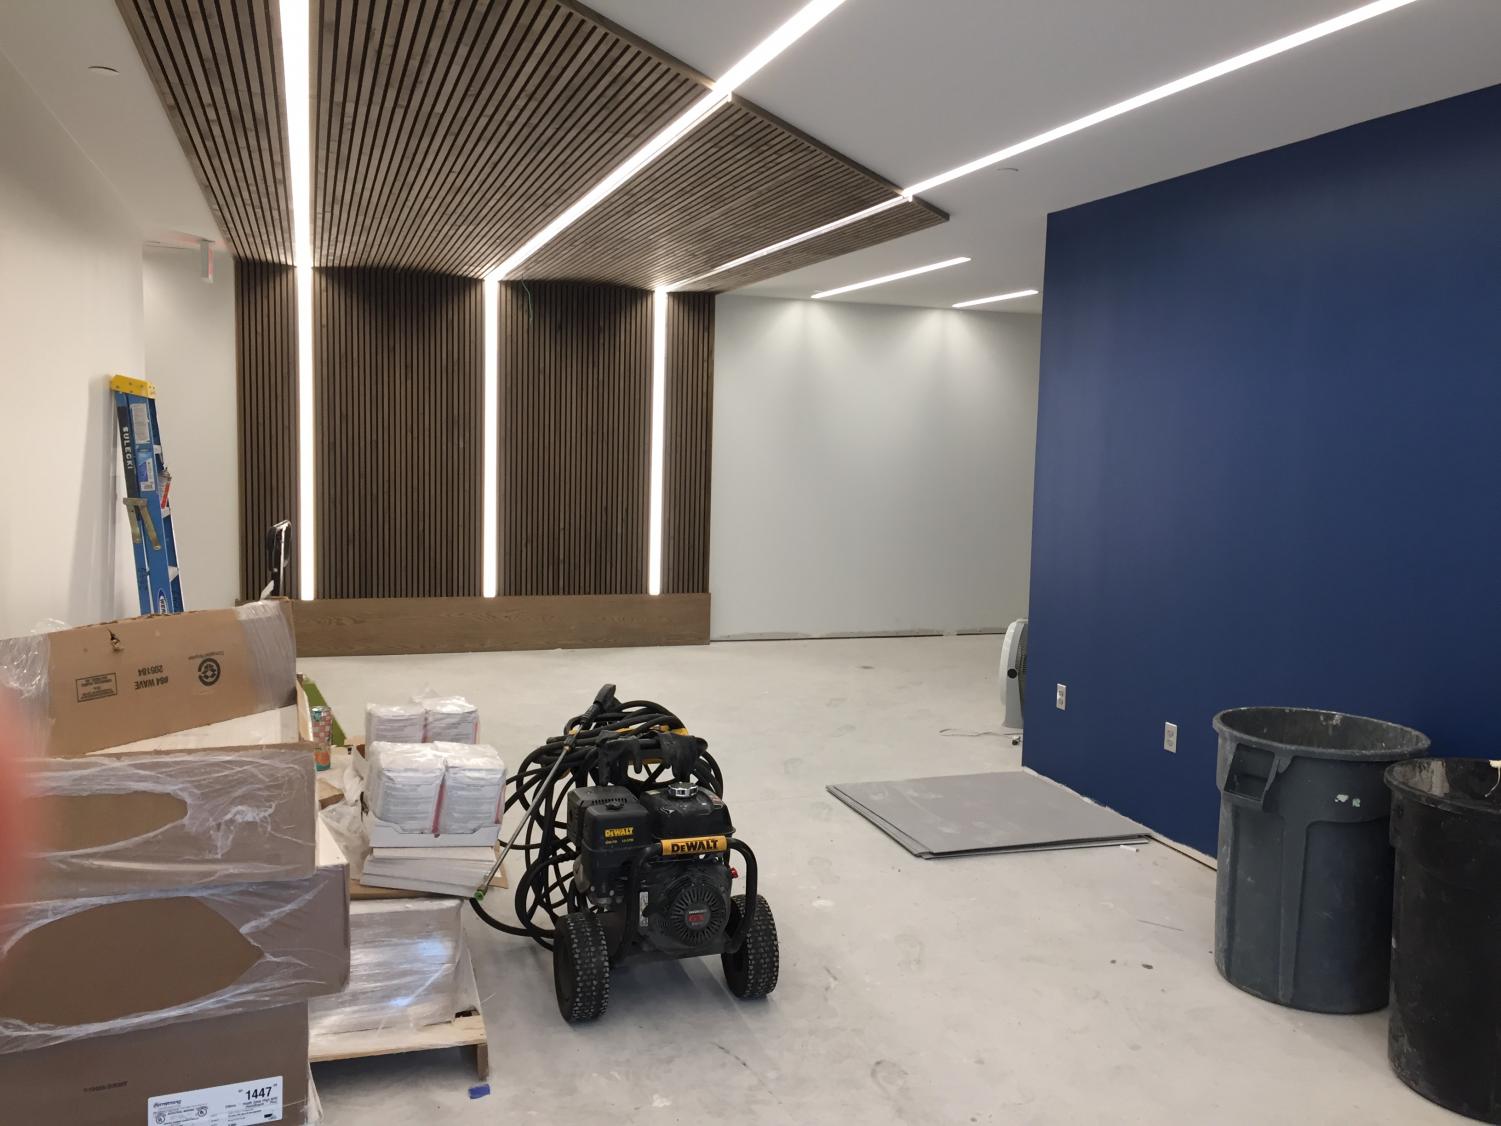 The current inside of the new locker room area, which is in progress.